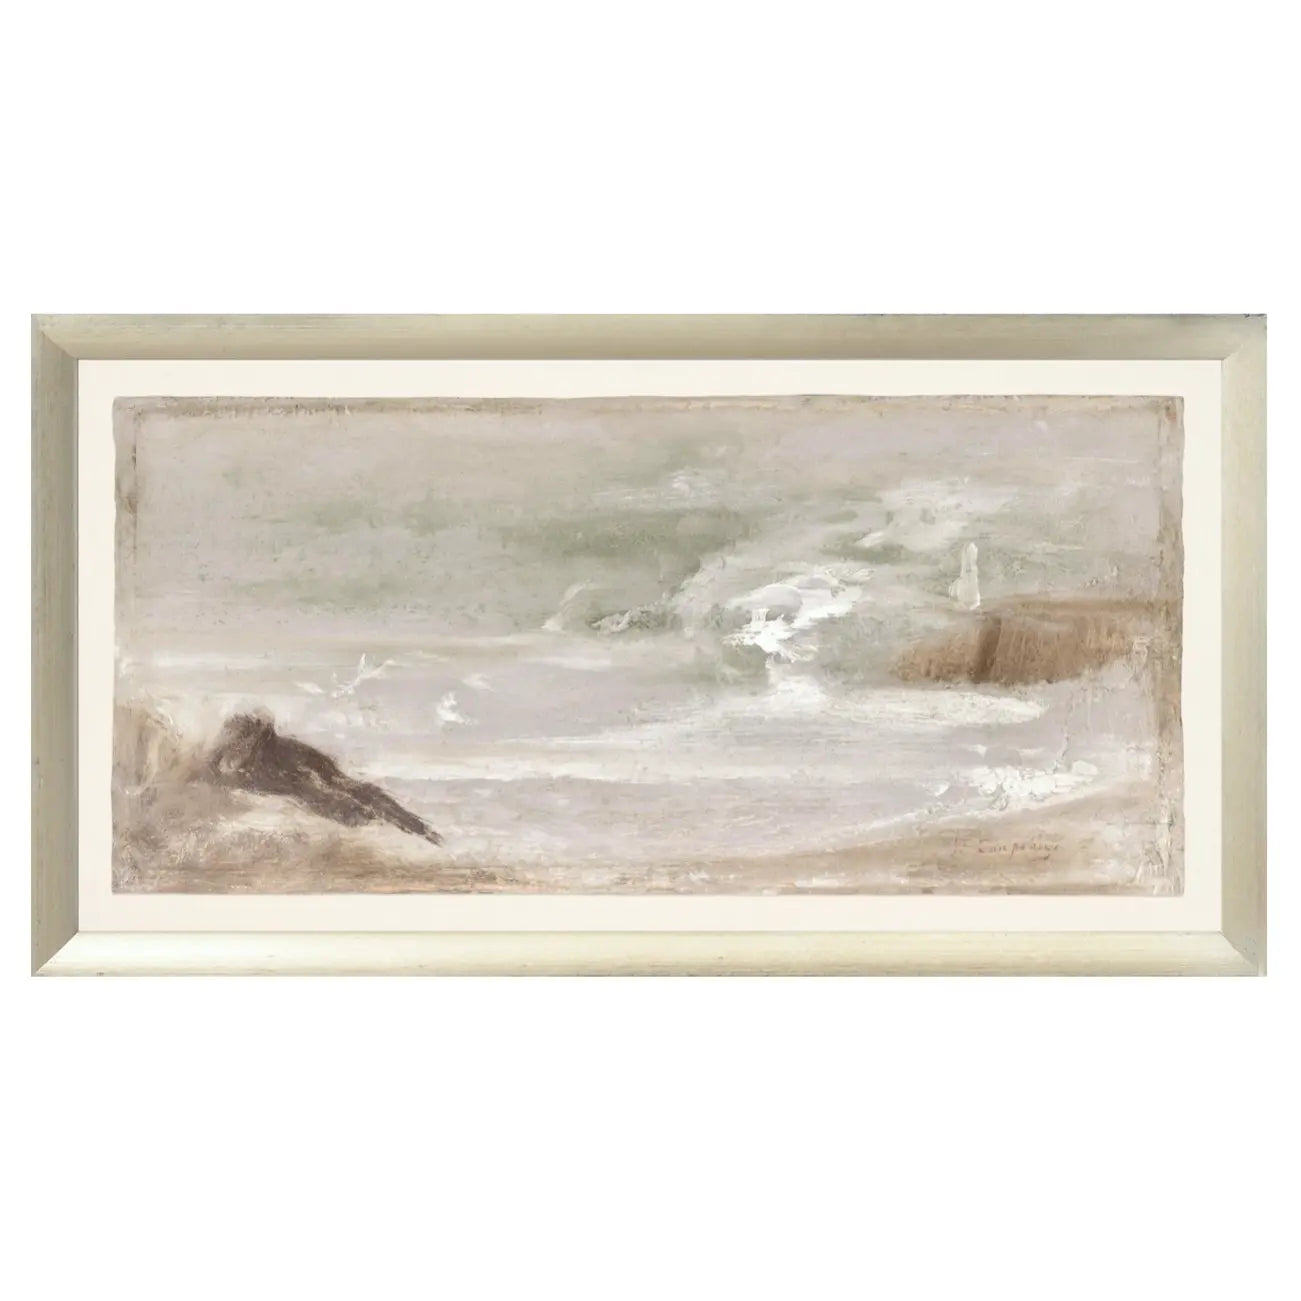 Seascape 1861 Framed Art Print from Collection 08 - Home Smith